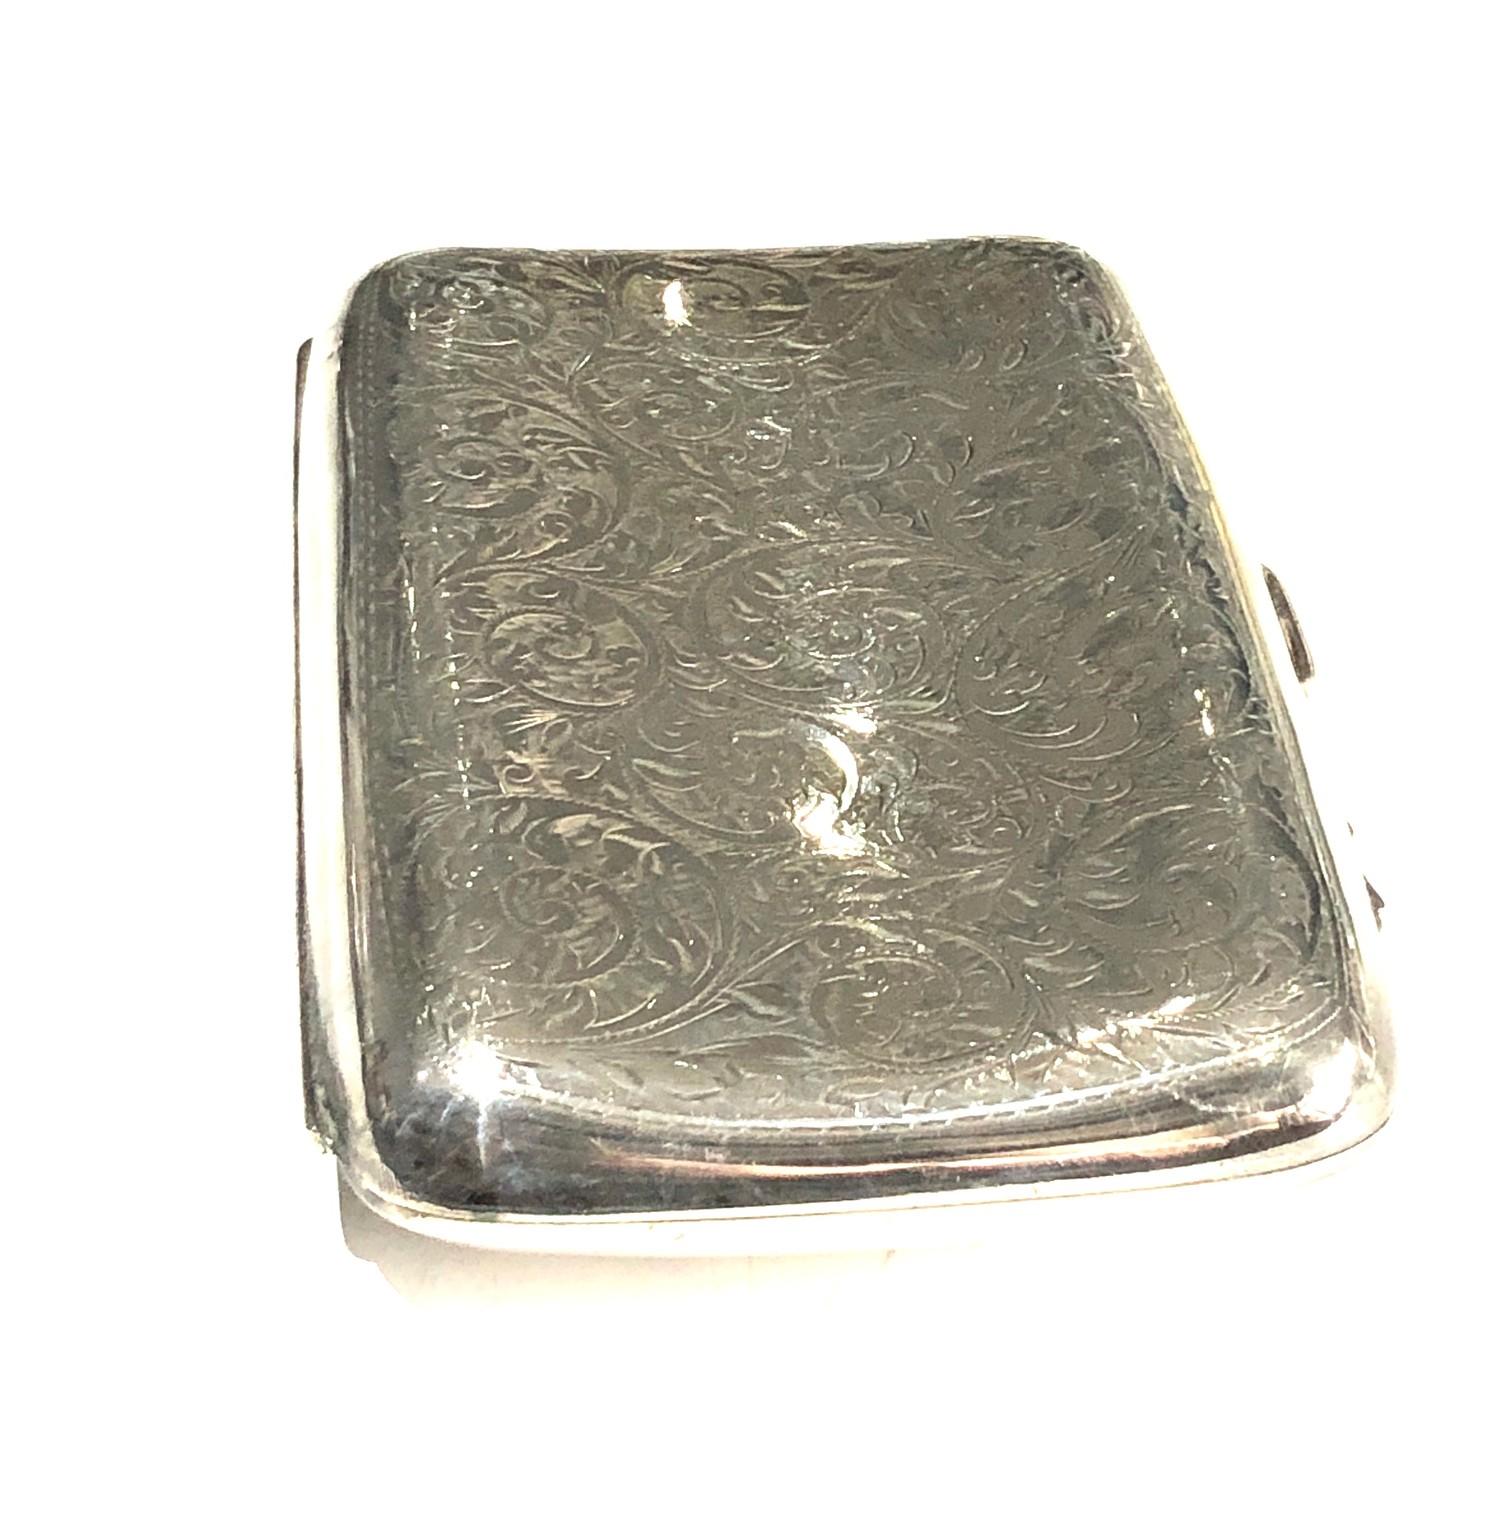 Antique silver cigarette / cigar case weight 180g - Image 3 of 5